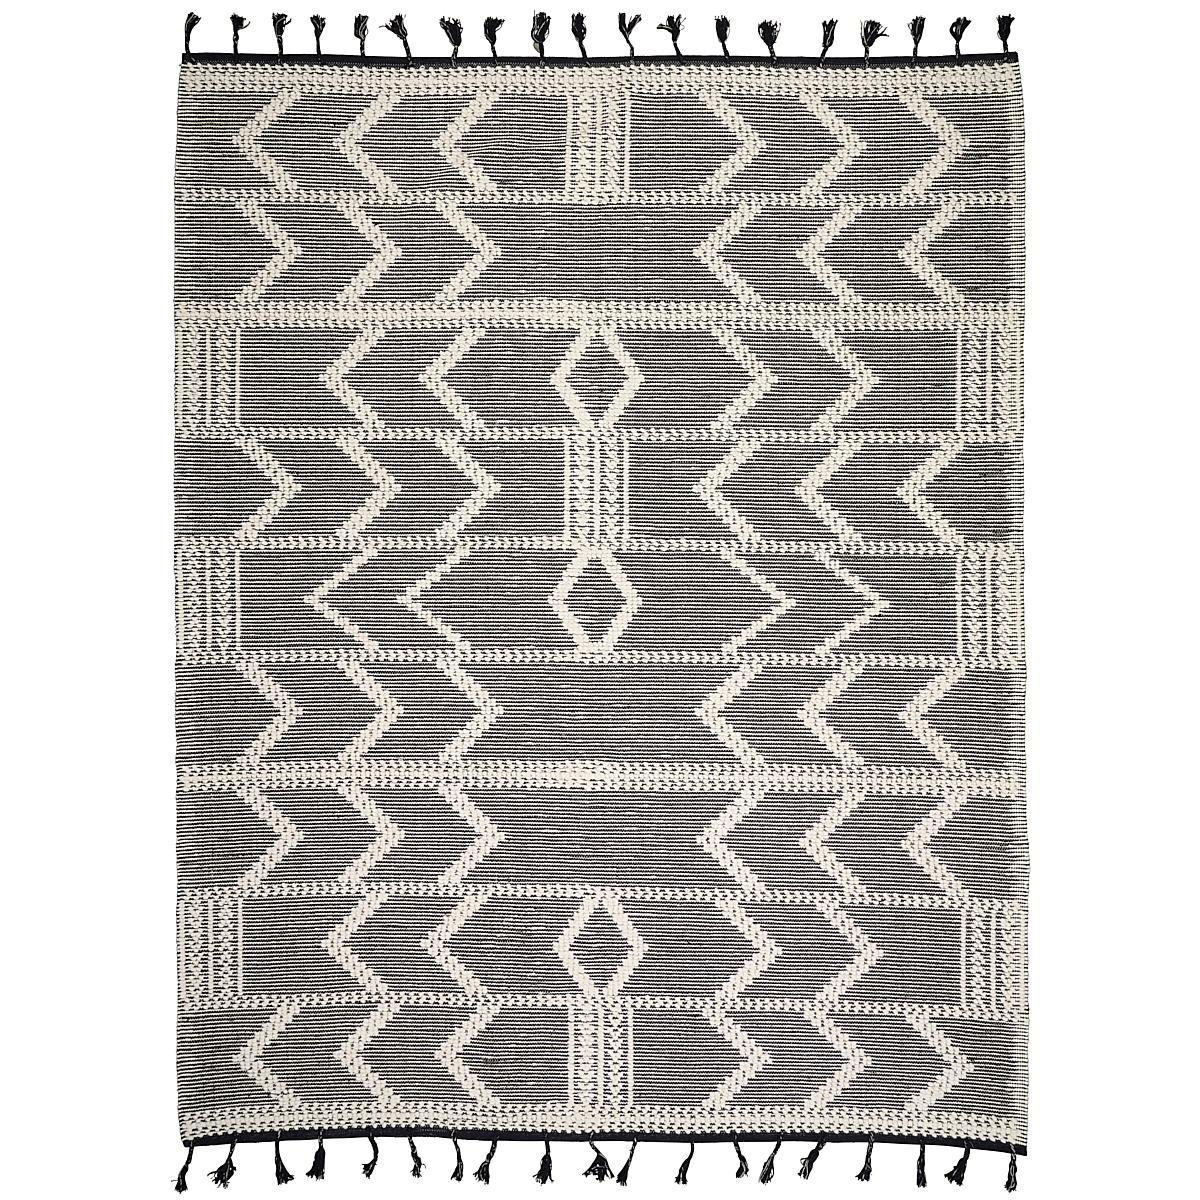 Malta French Knot Rug_CHARCOAL